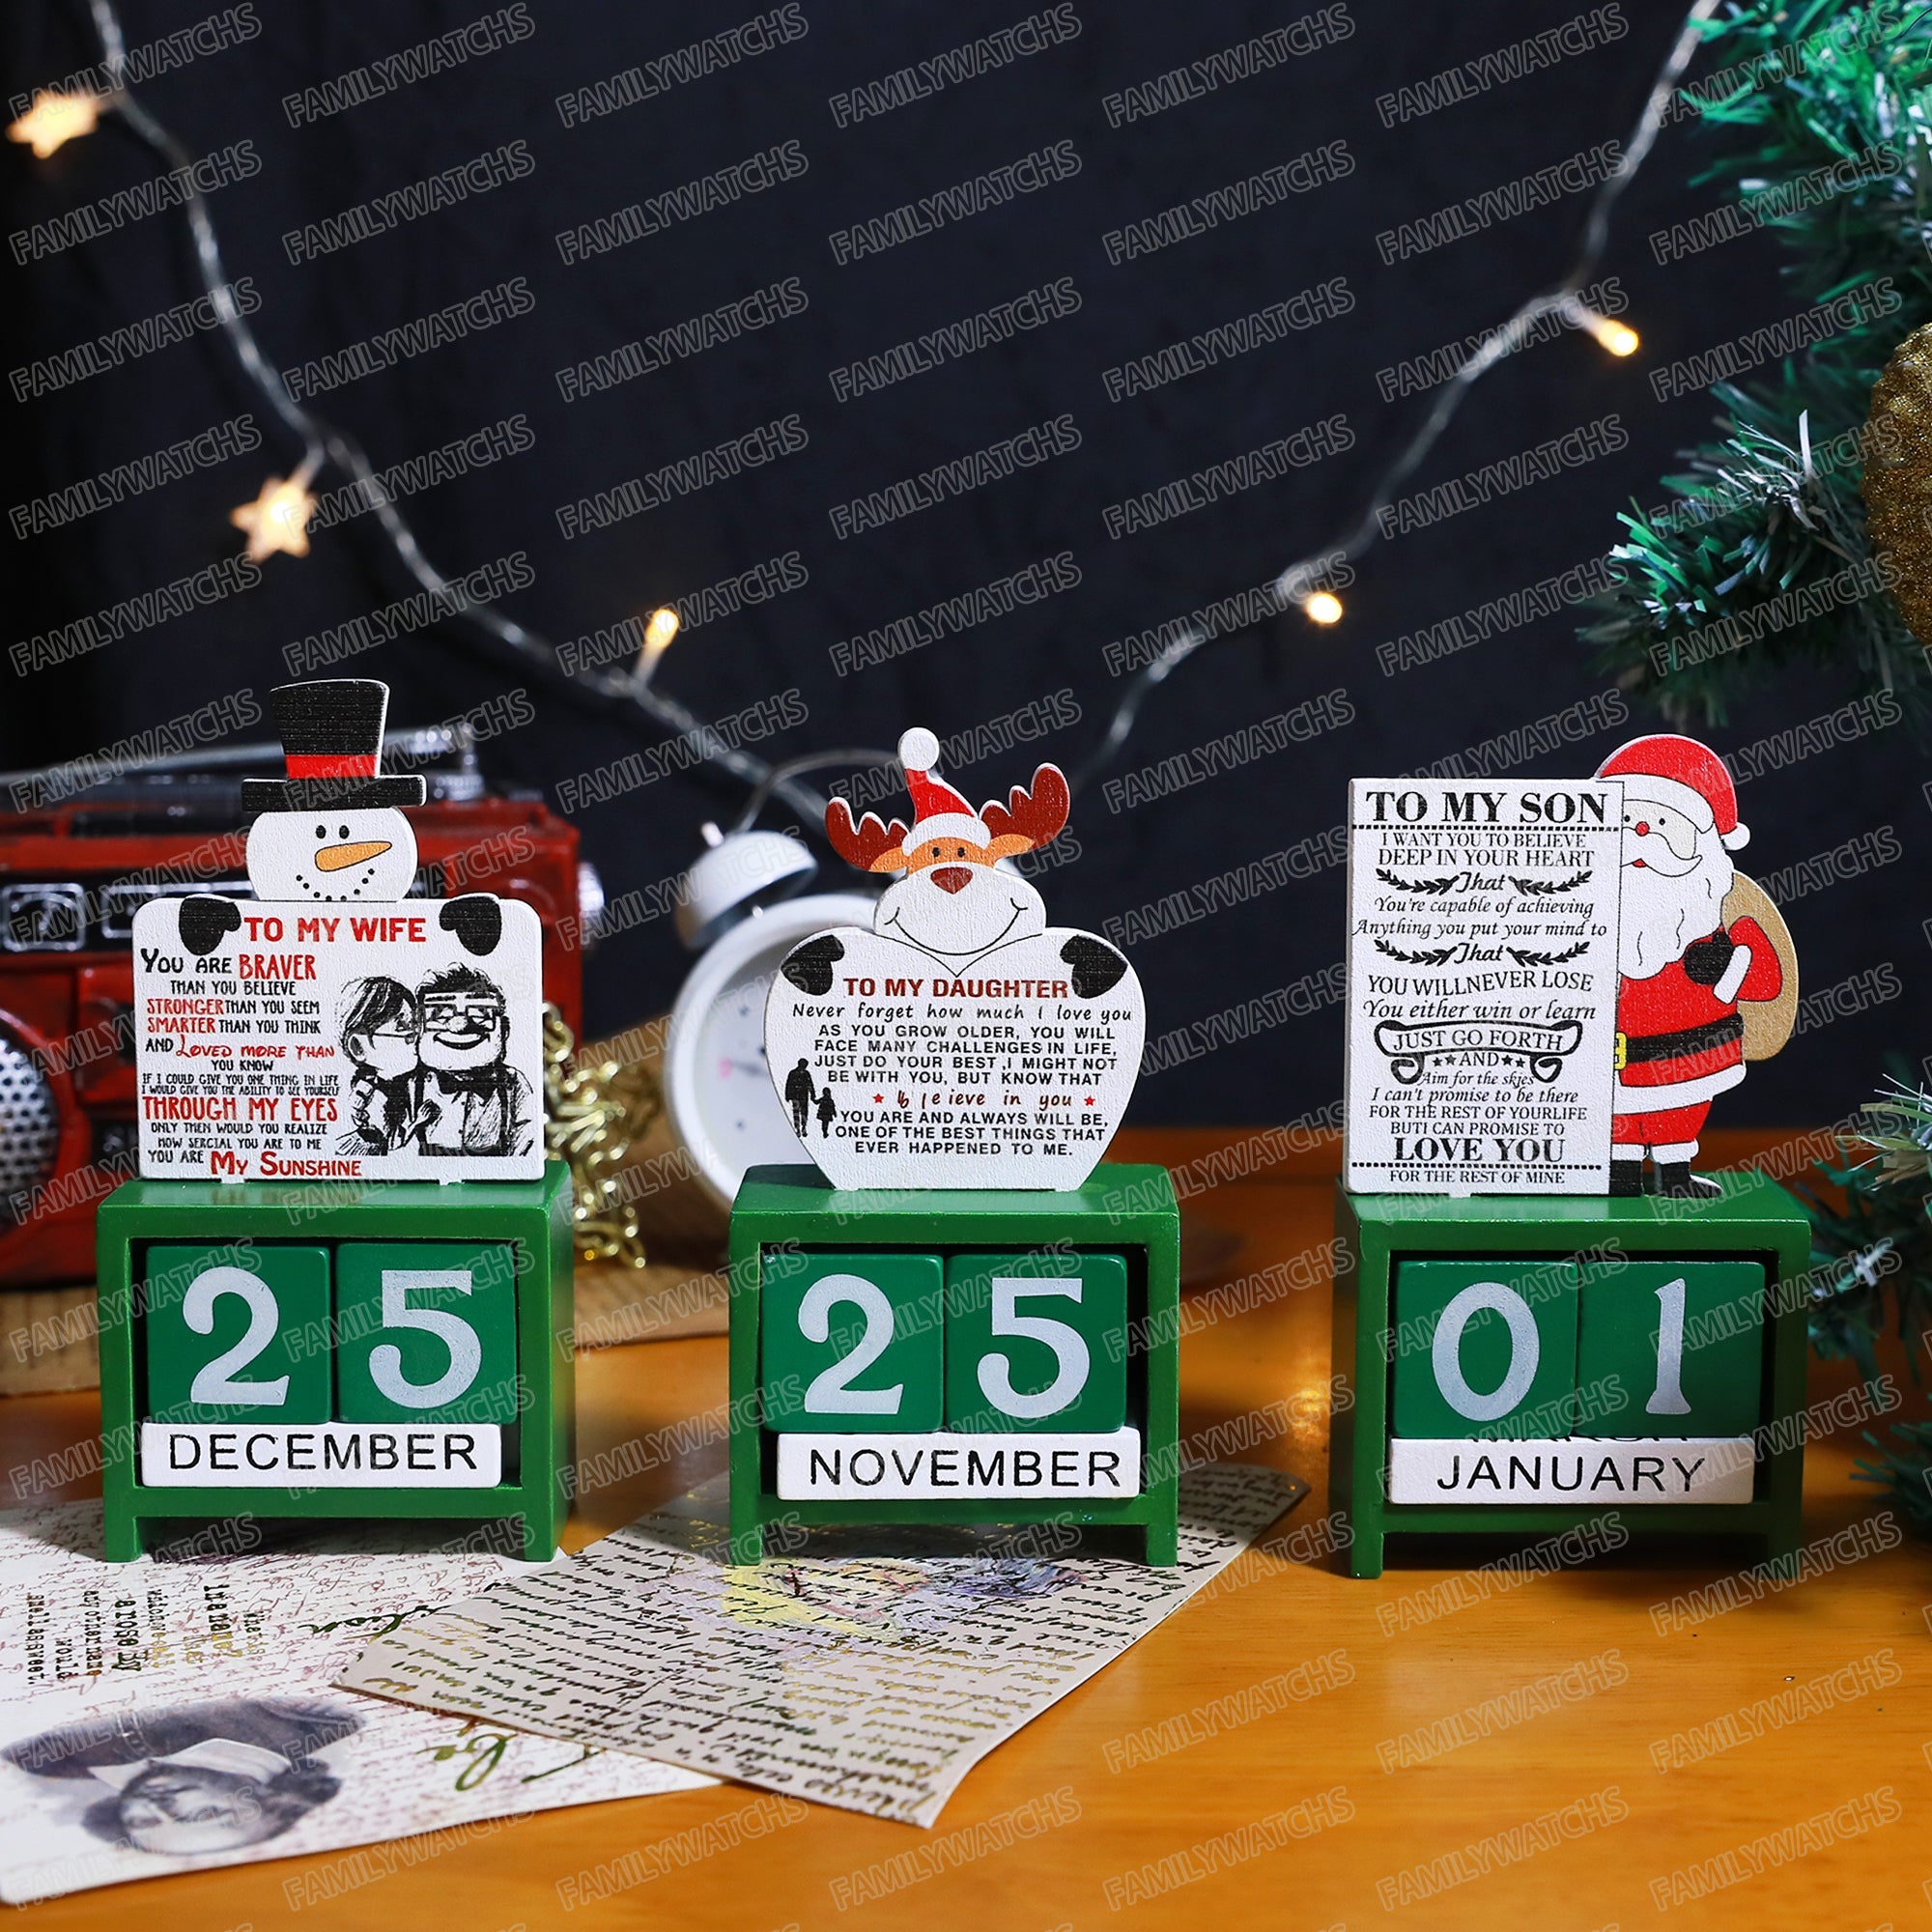 To My Daughter - Christmas Advent Countdown Calendar Number Date Wooden Blocks Tabletop Desk Calendar Decoration for Home Office Decoration - Family Watchs